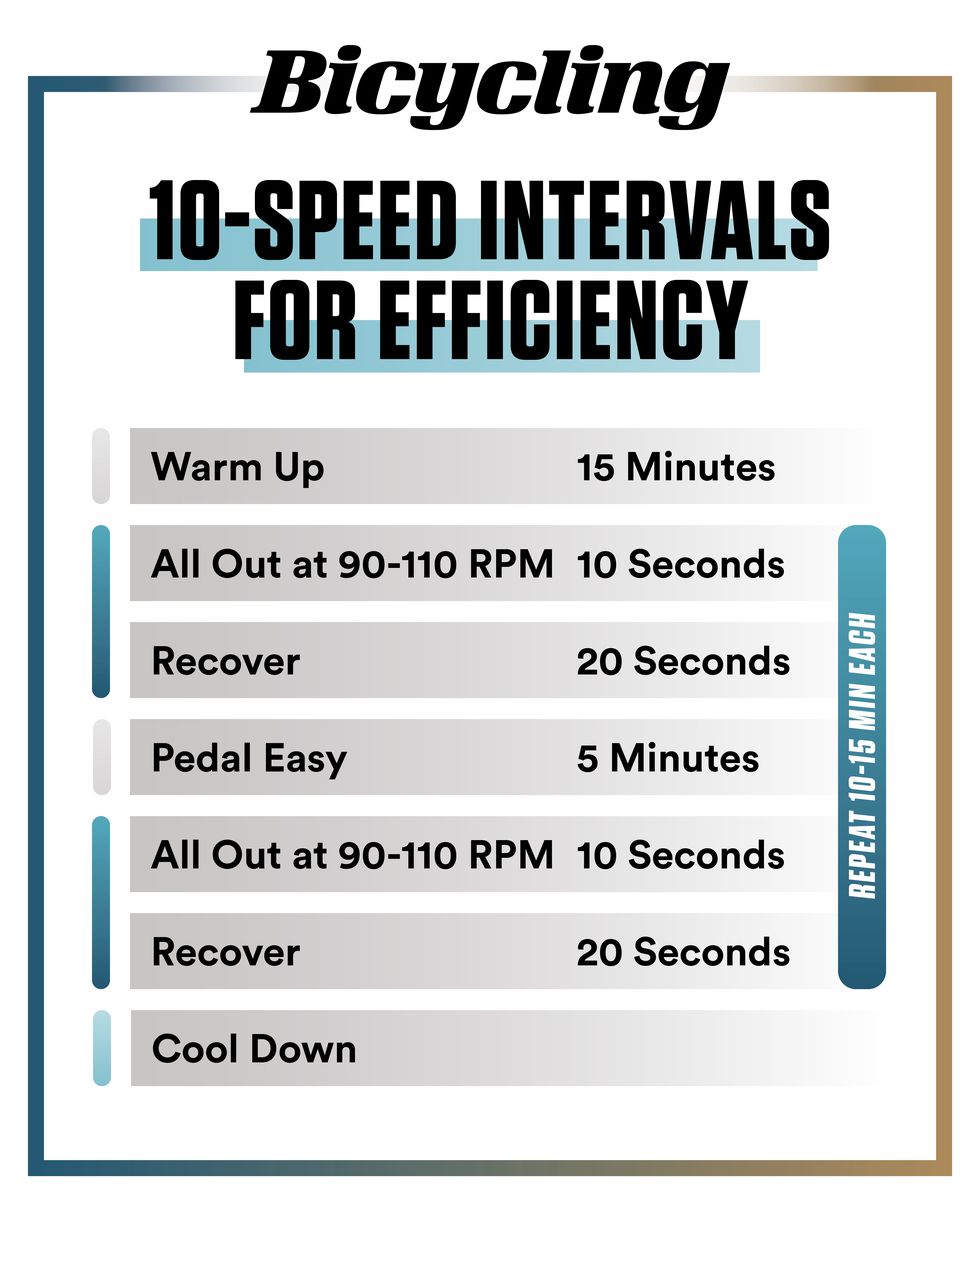 60 Minute Speed Interval Workout